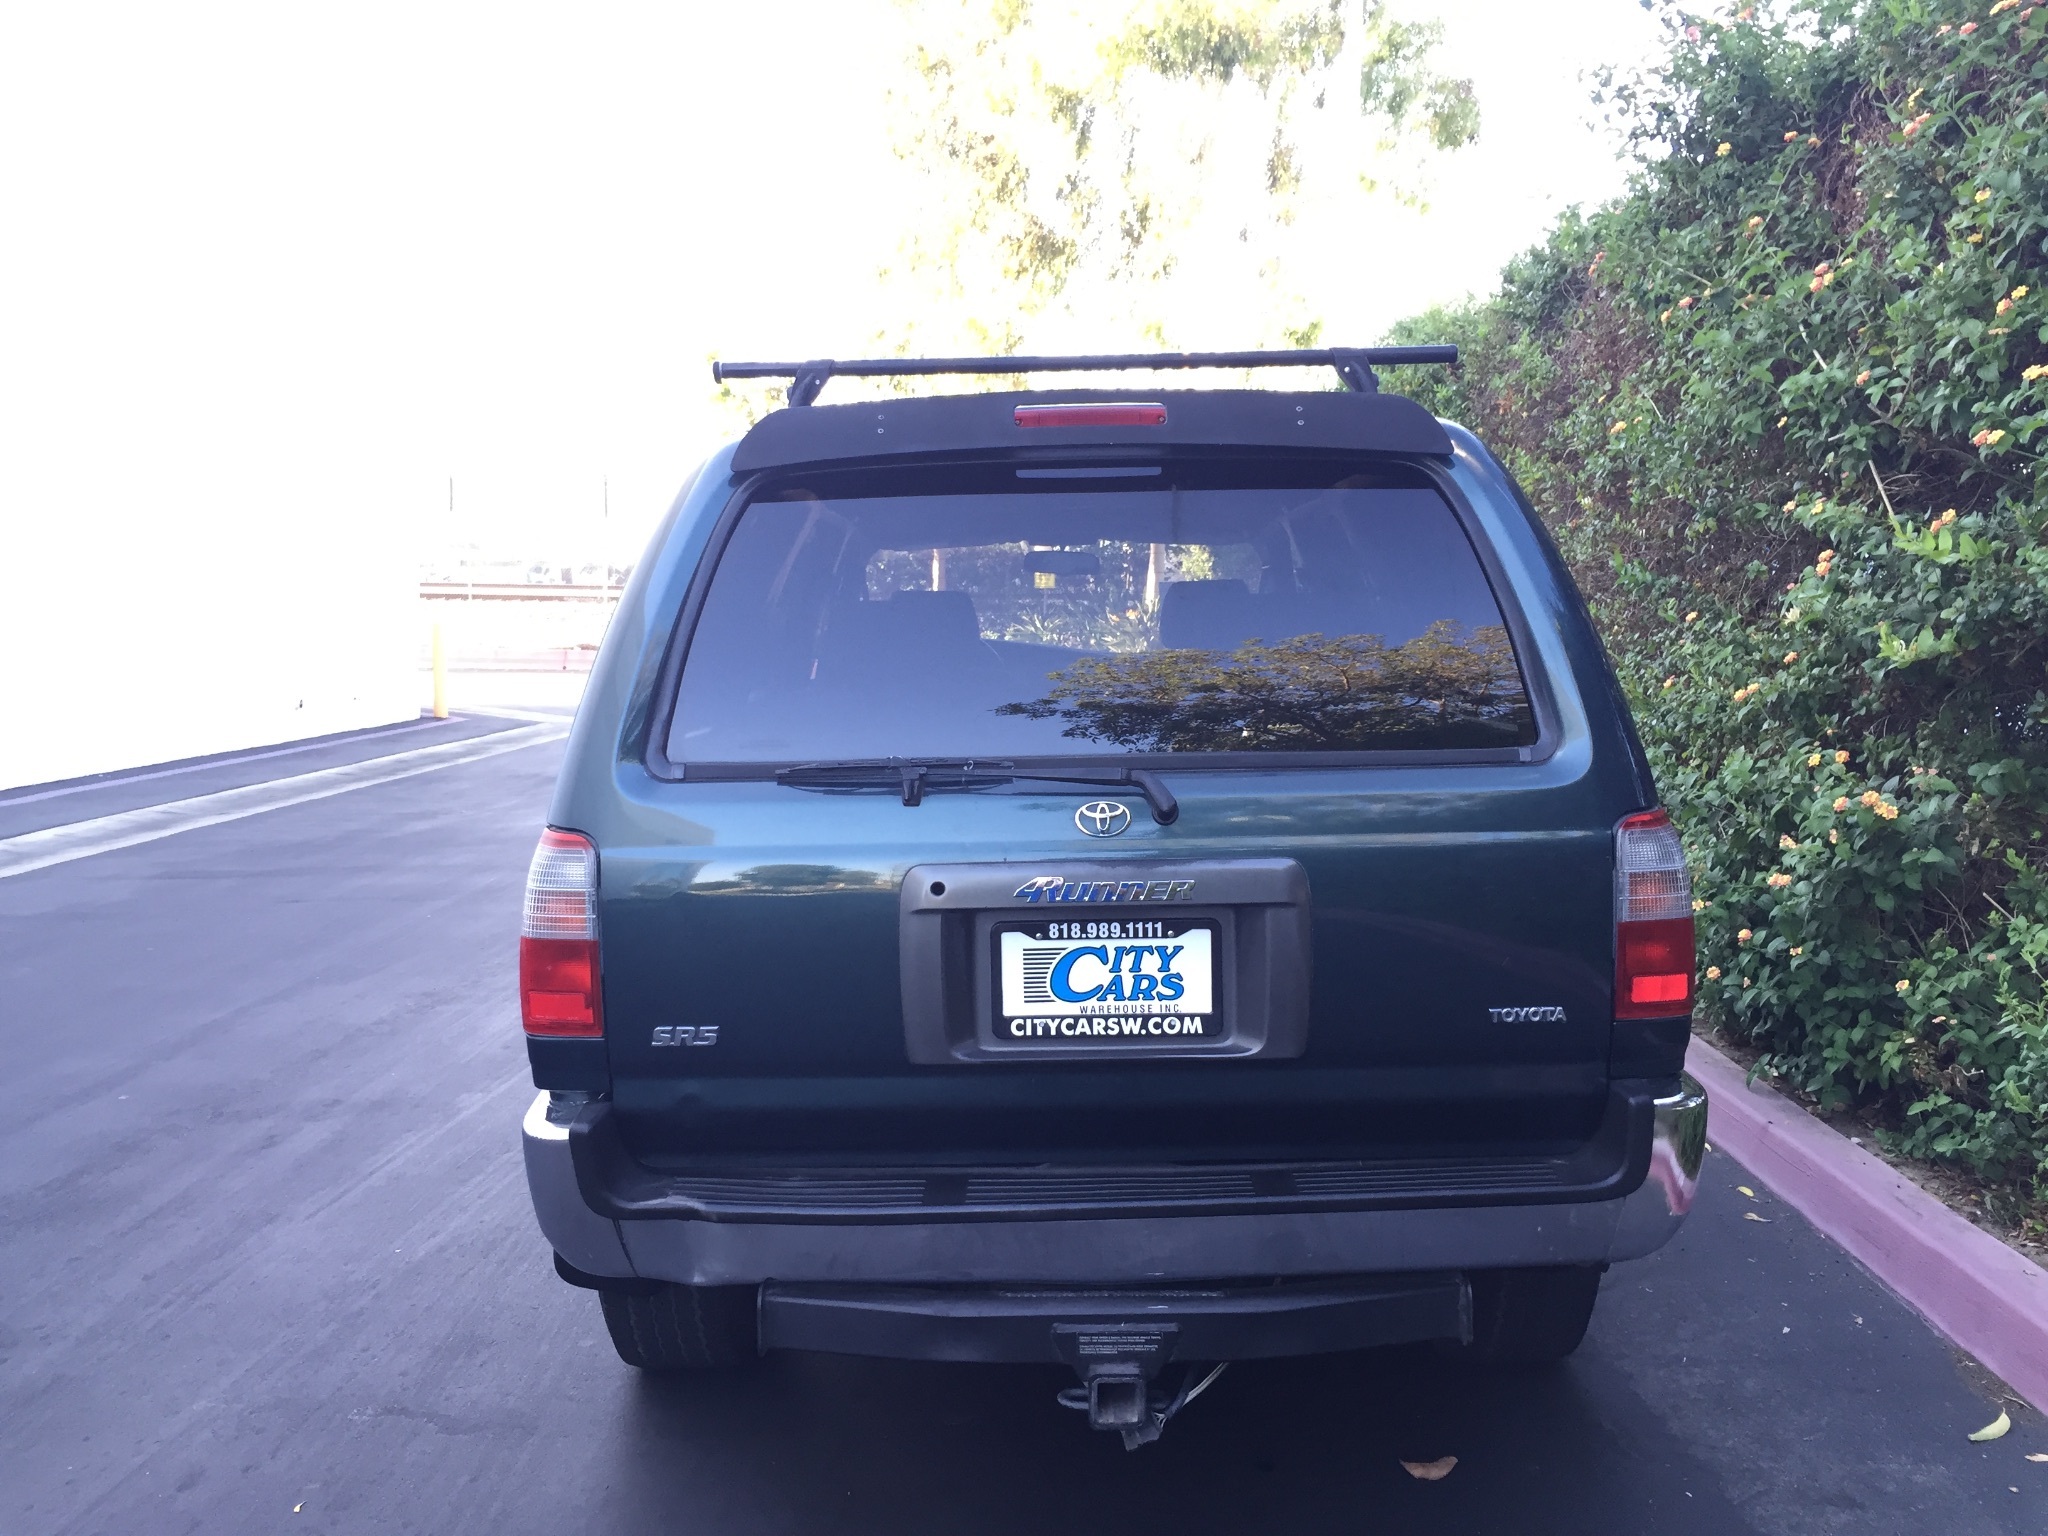 Used 1998 Toyota 4runner Sr5 At City Cars Warehouse Inc